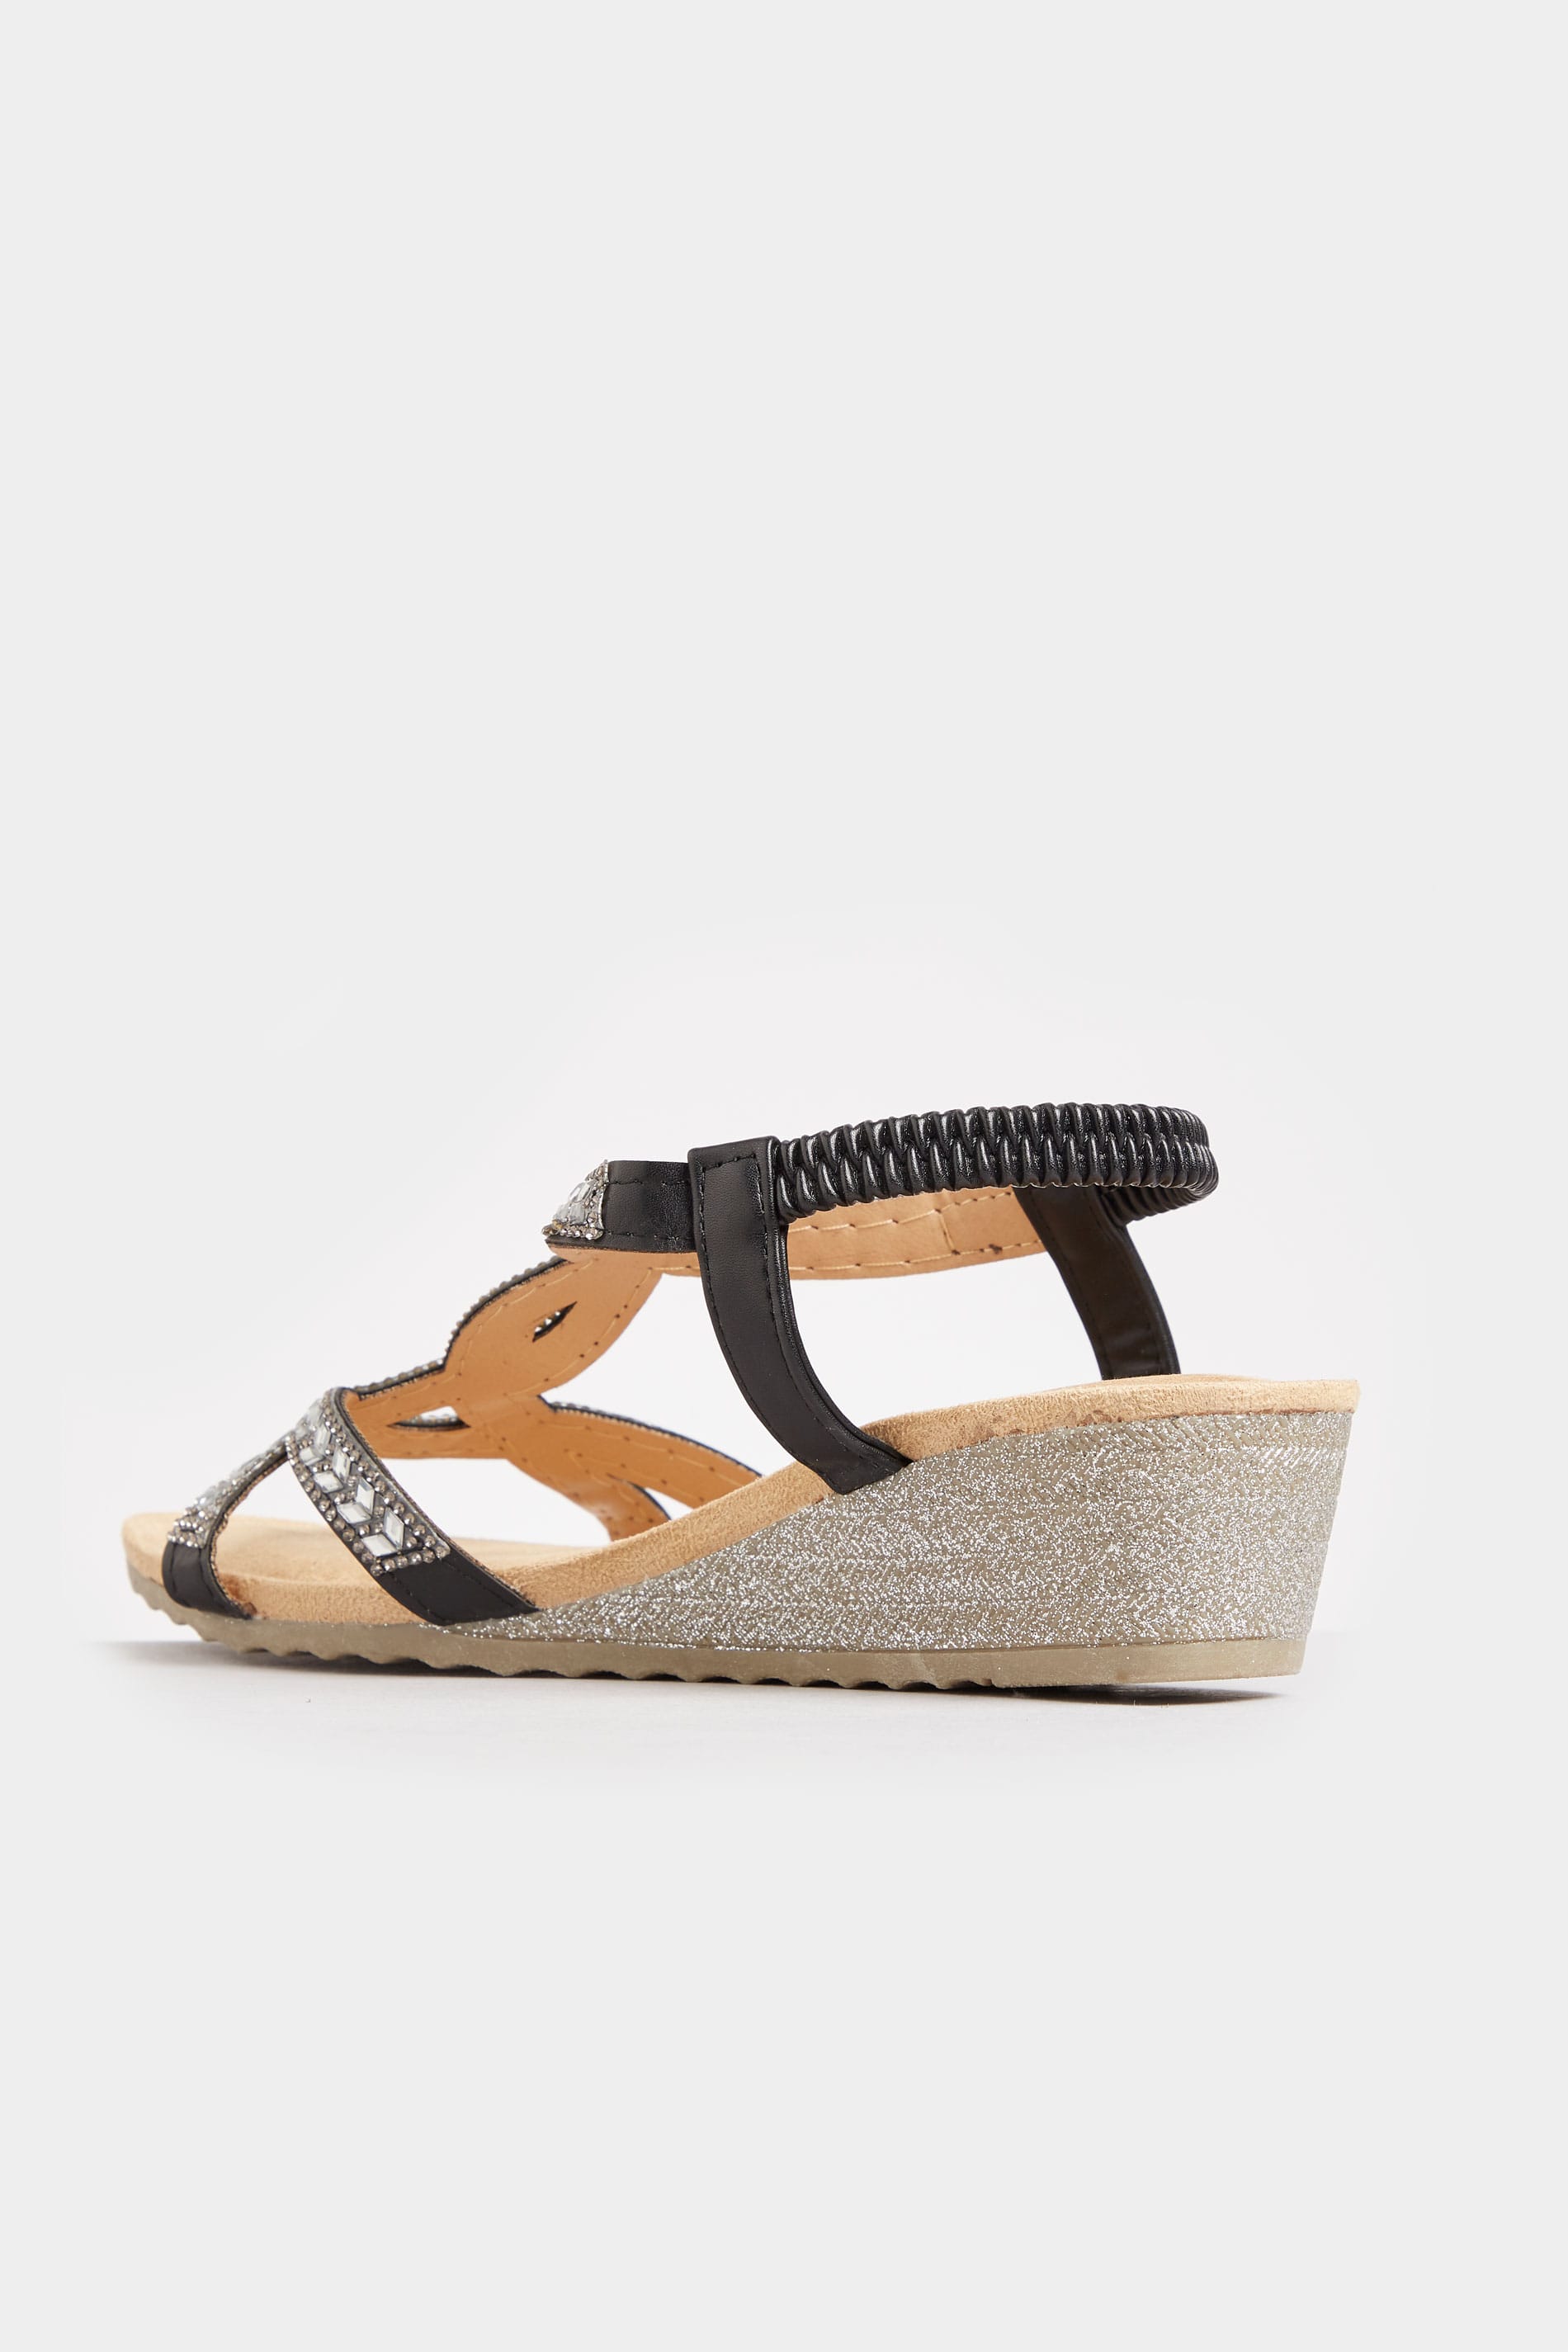 Black Diamante Twist Wedge Sandals In Extra Wide Fit | Yours Clothing